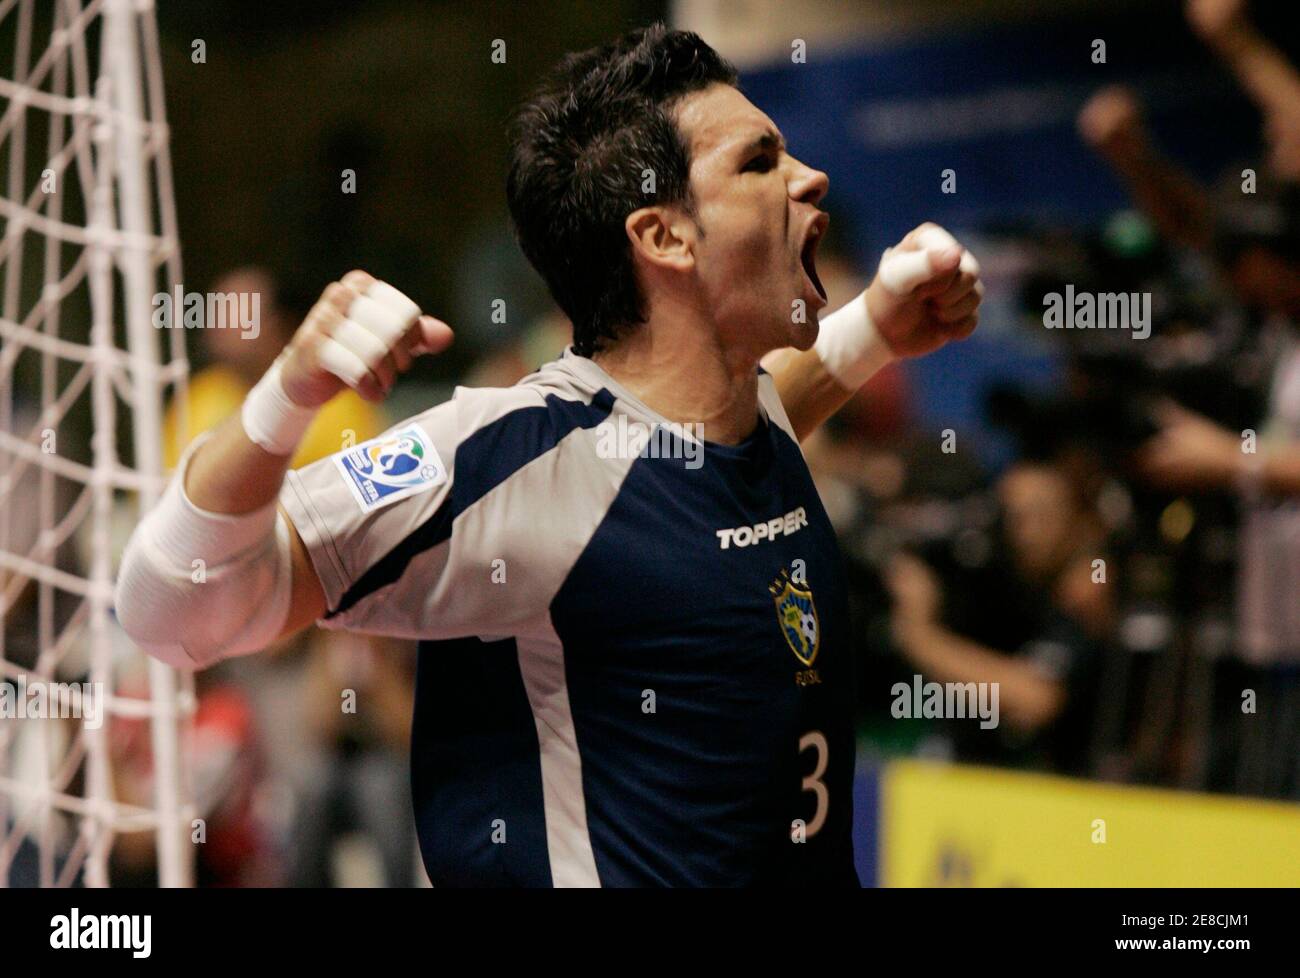 Franklin of Brazil celebrates after winning the FIFA Futsal World Cup soccer  match against Spain at the Gimnasio Maracanazinho in Rio de Janeiro October  19, 2008. REUTERS/Bruno Domingos (BRAZIL Stock Photo - Alamy